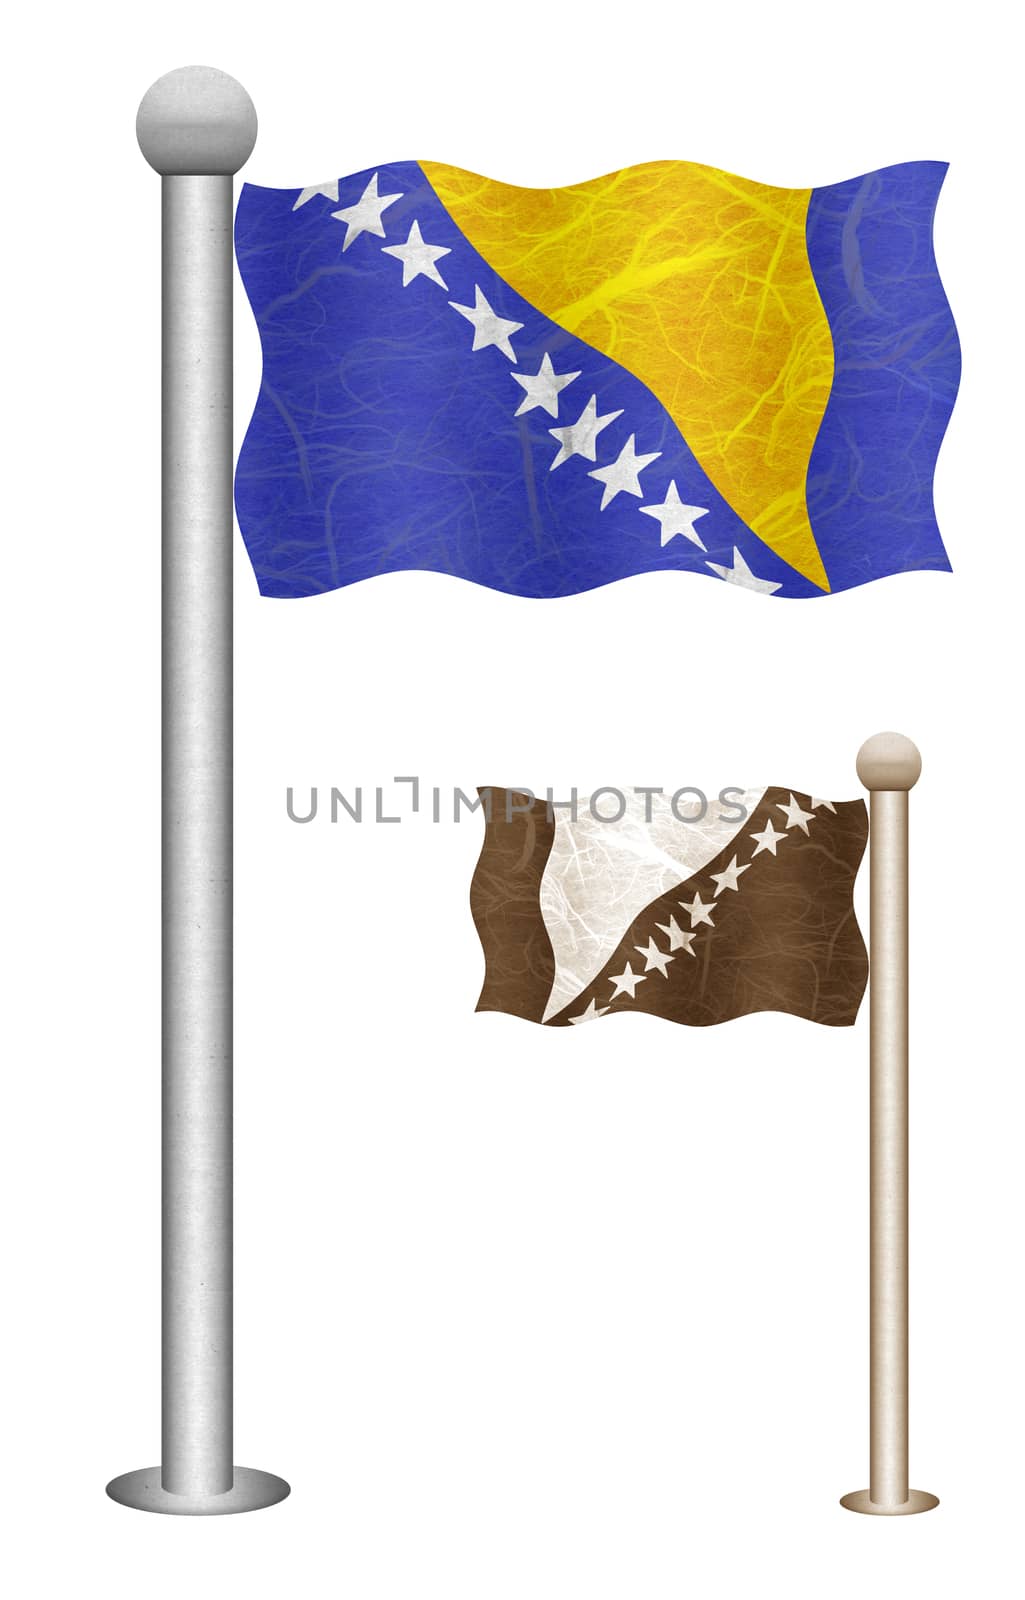 Bosnia and Herzegovina flag waving on the wind. Flags of countries in Europe. Mulberry paper on white background.